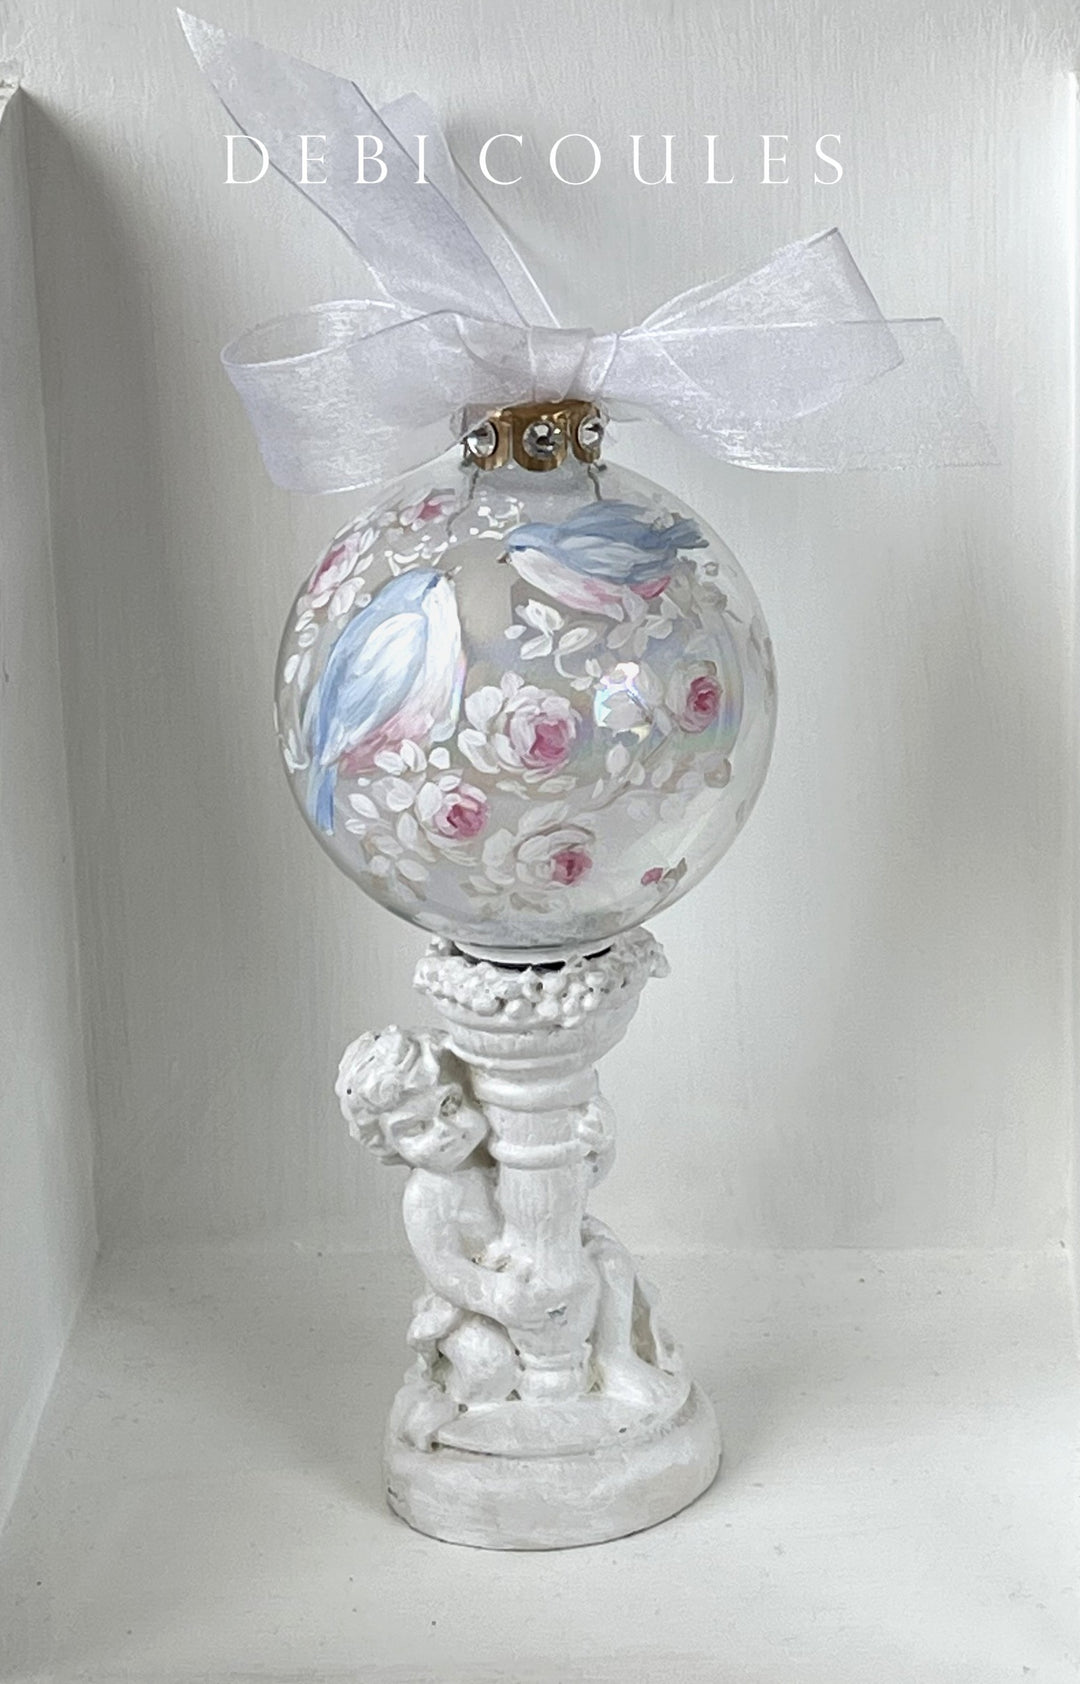 Shabby Chic Hand-Painted Bluebirds and Roses Rhinestones Iridescent Glass Globe Holiday Ornament by Debi Coules